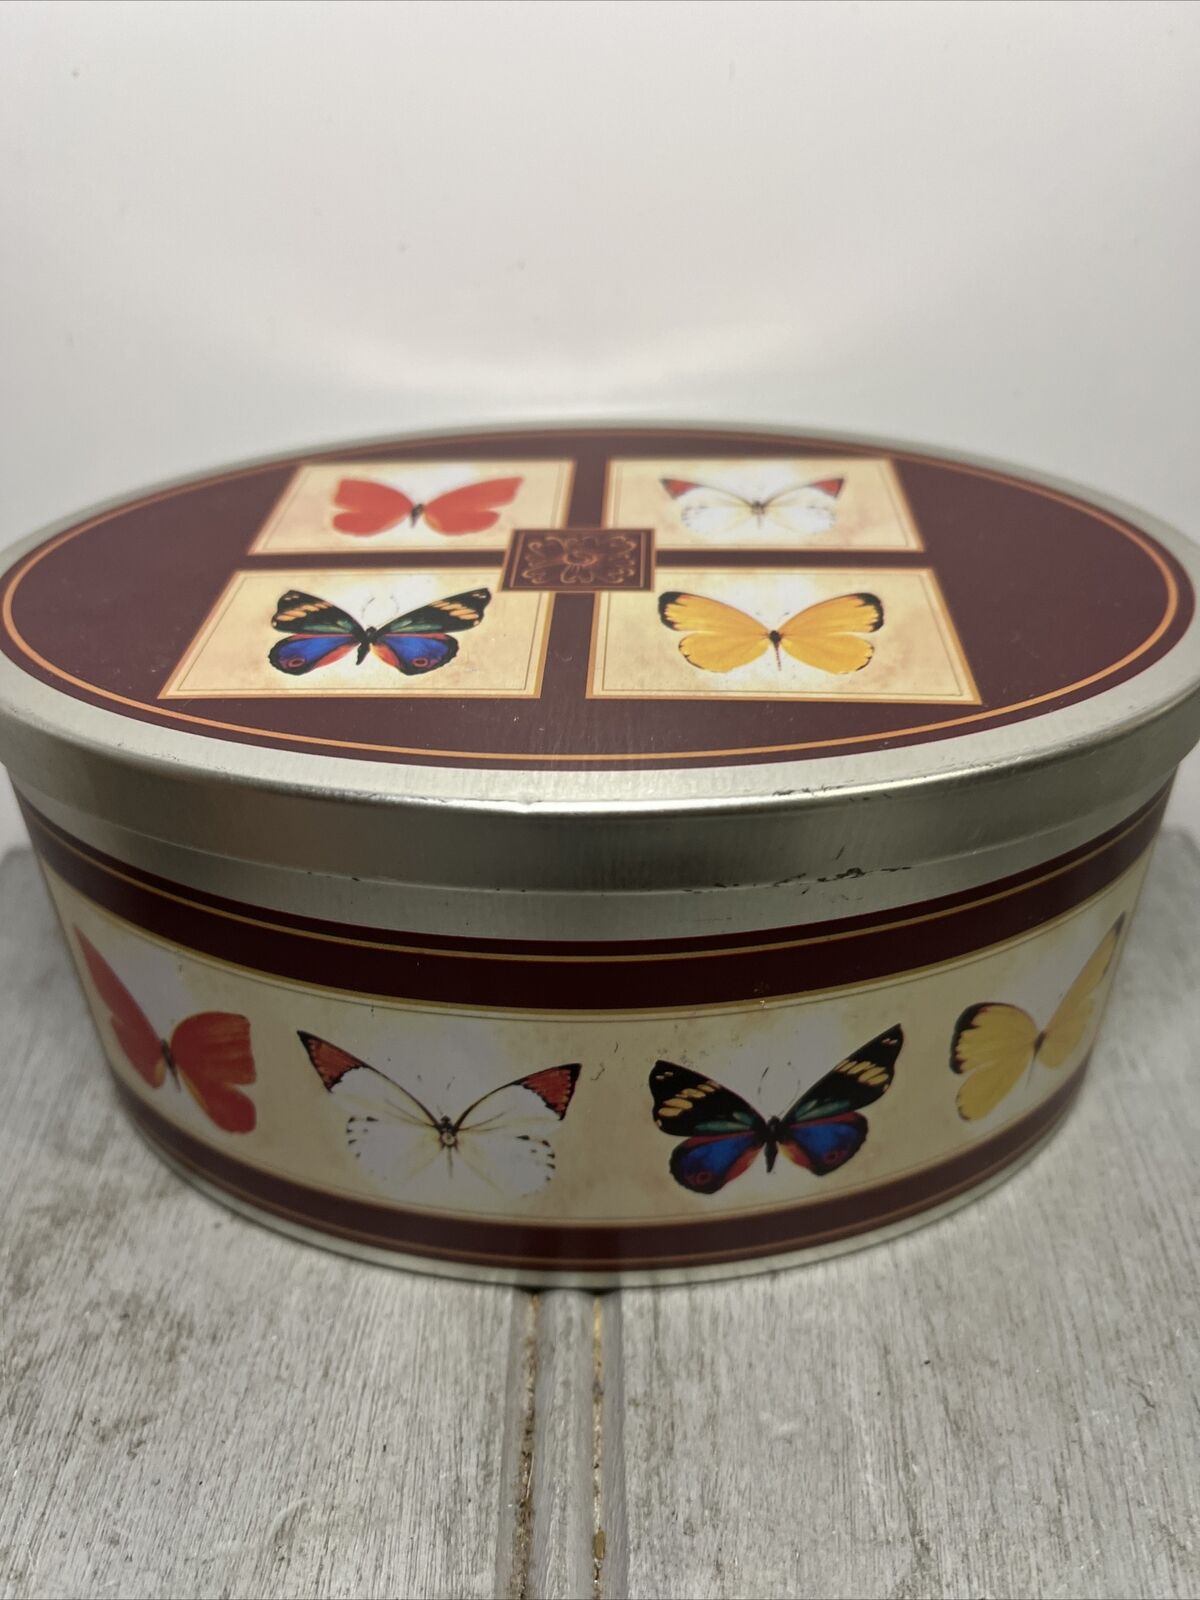 Butterfly Oval Shaped EMPTY Collectable Tin Container Display